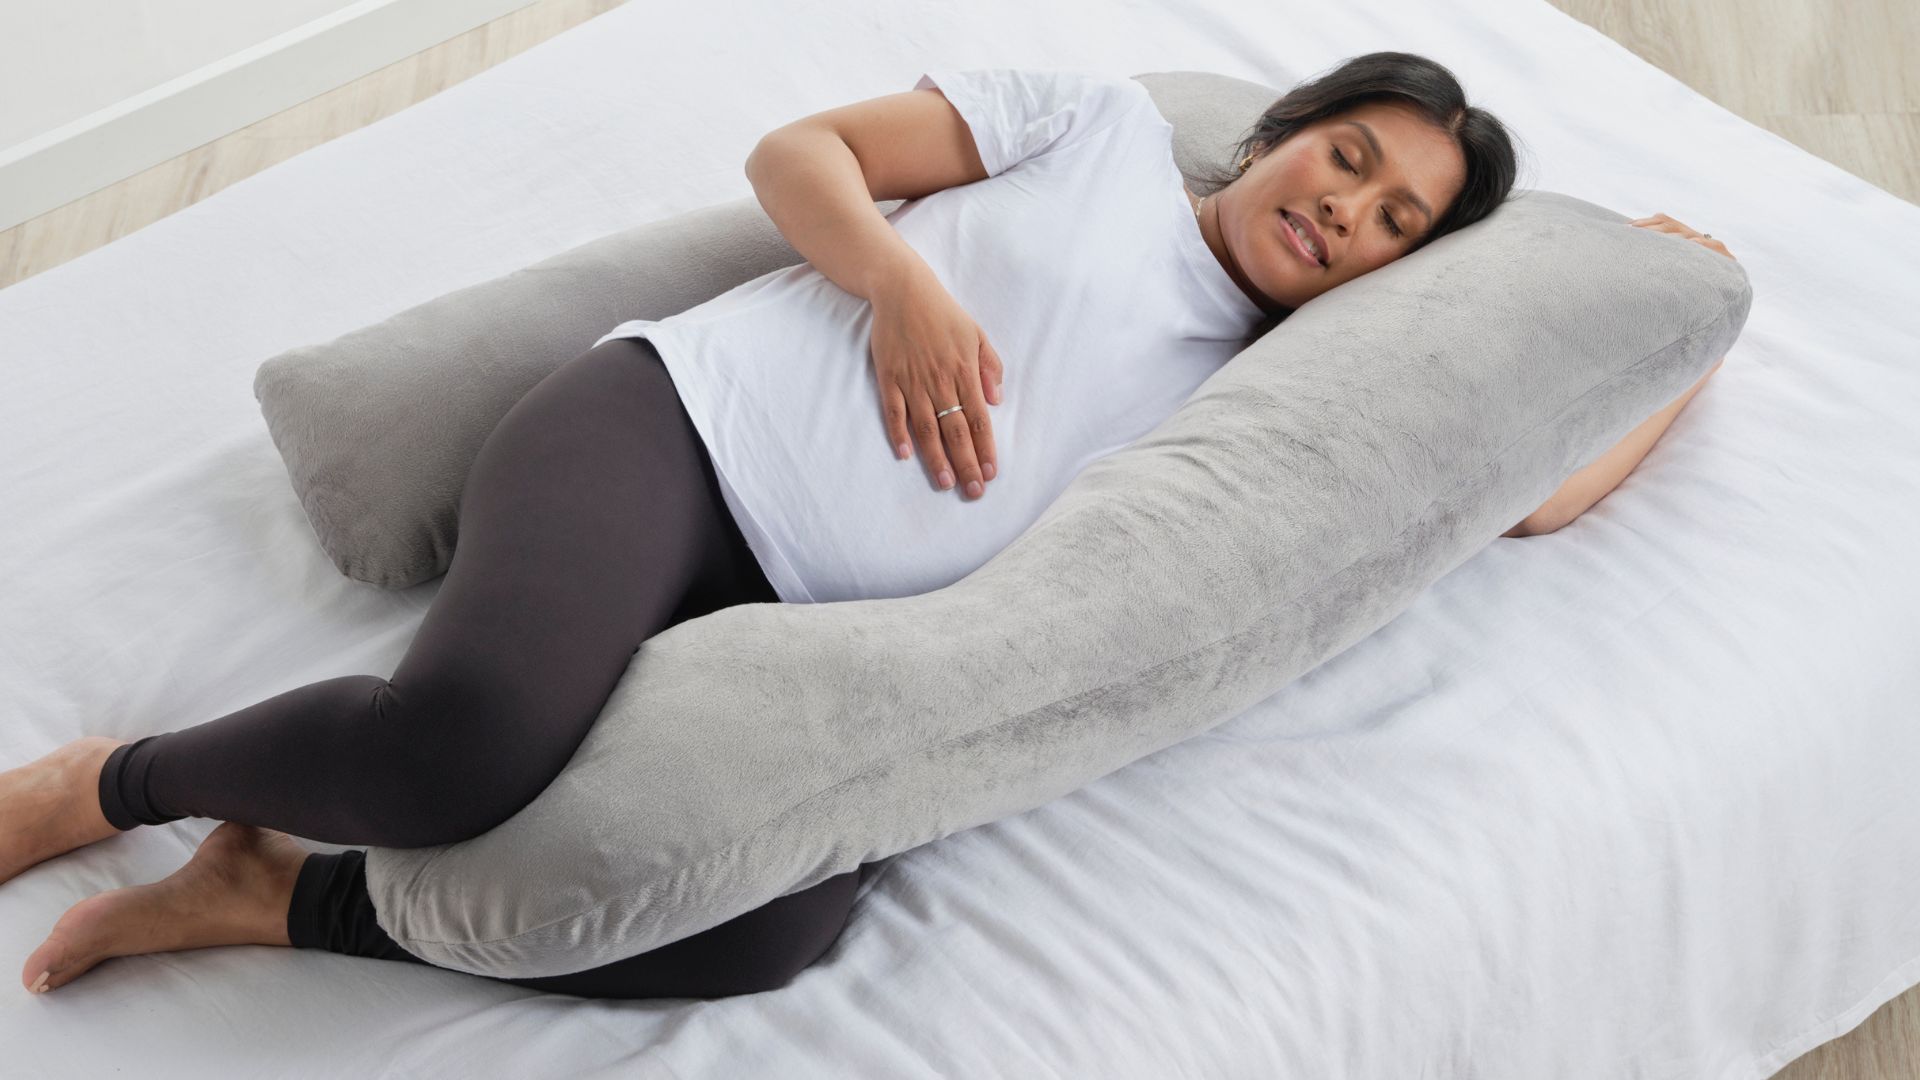 Sleeping on the side with the appropriate cushioning is recommended for pregnancy